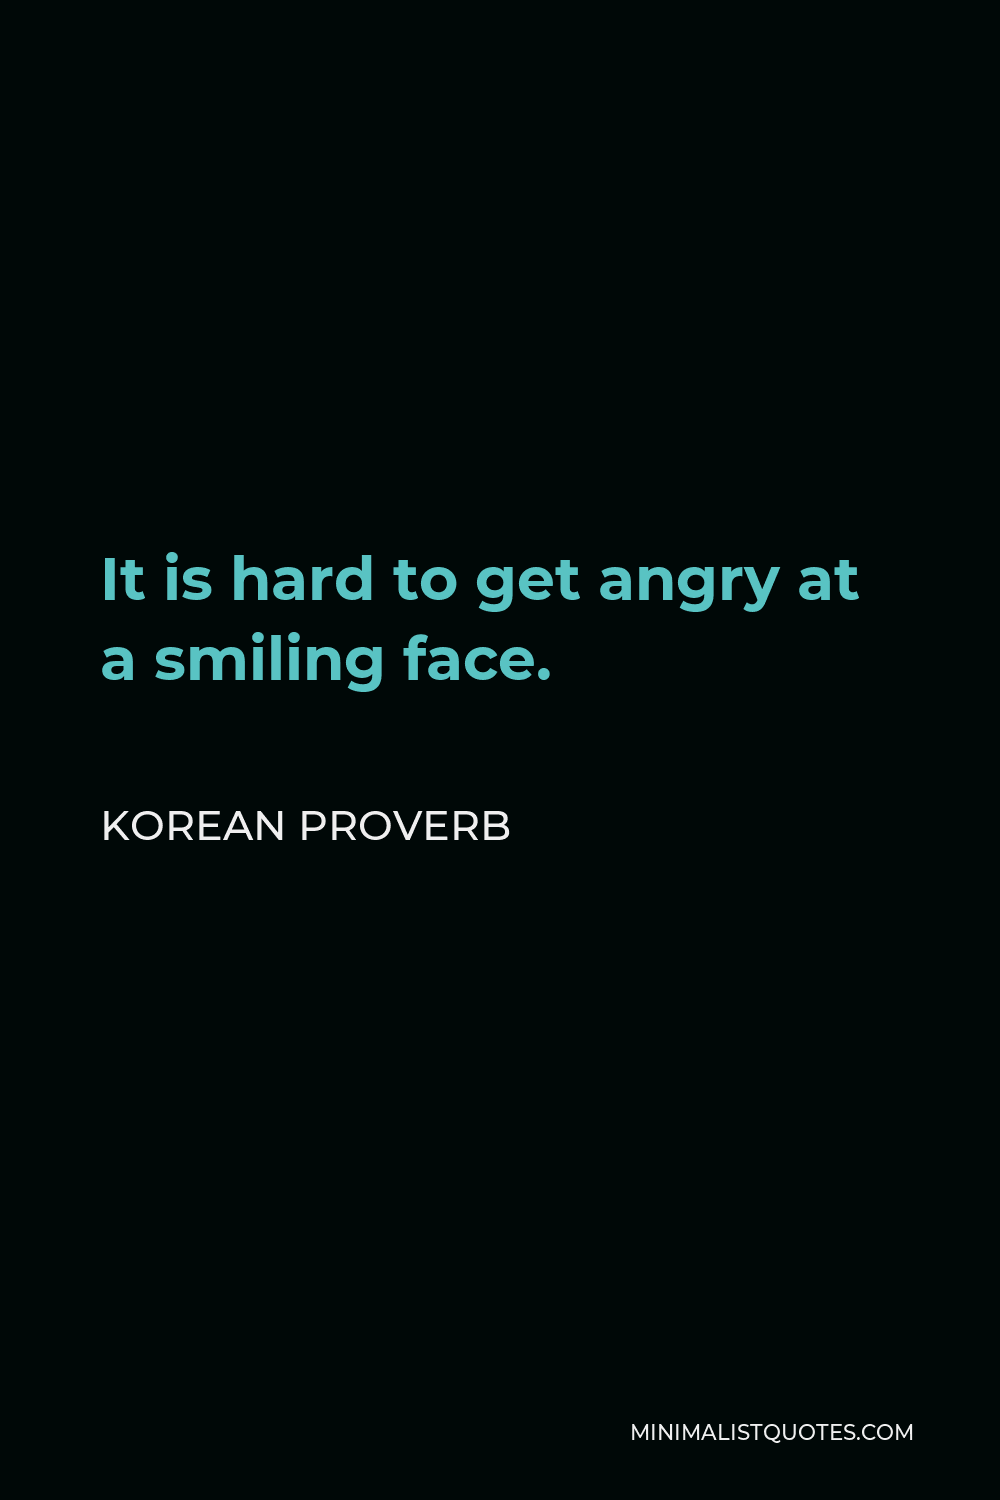 Korean Proverb Quote - It is hard to get angry at a smiling face.